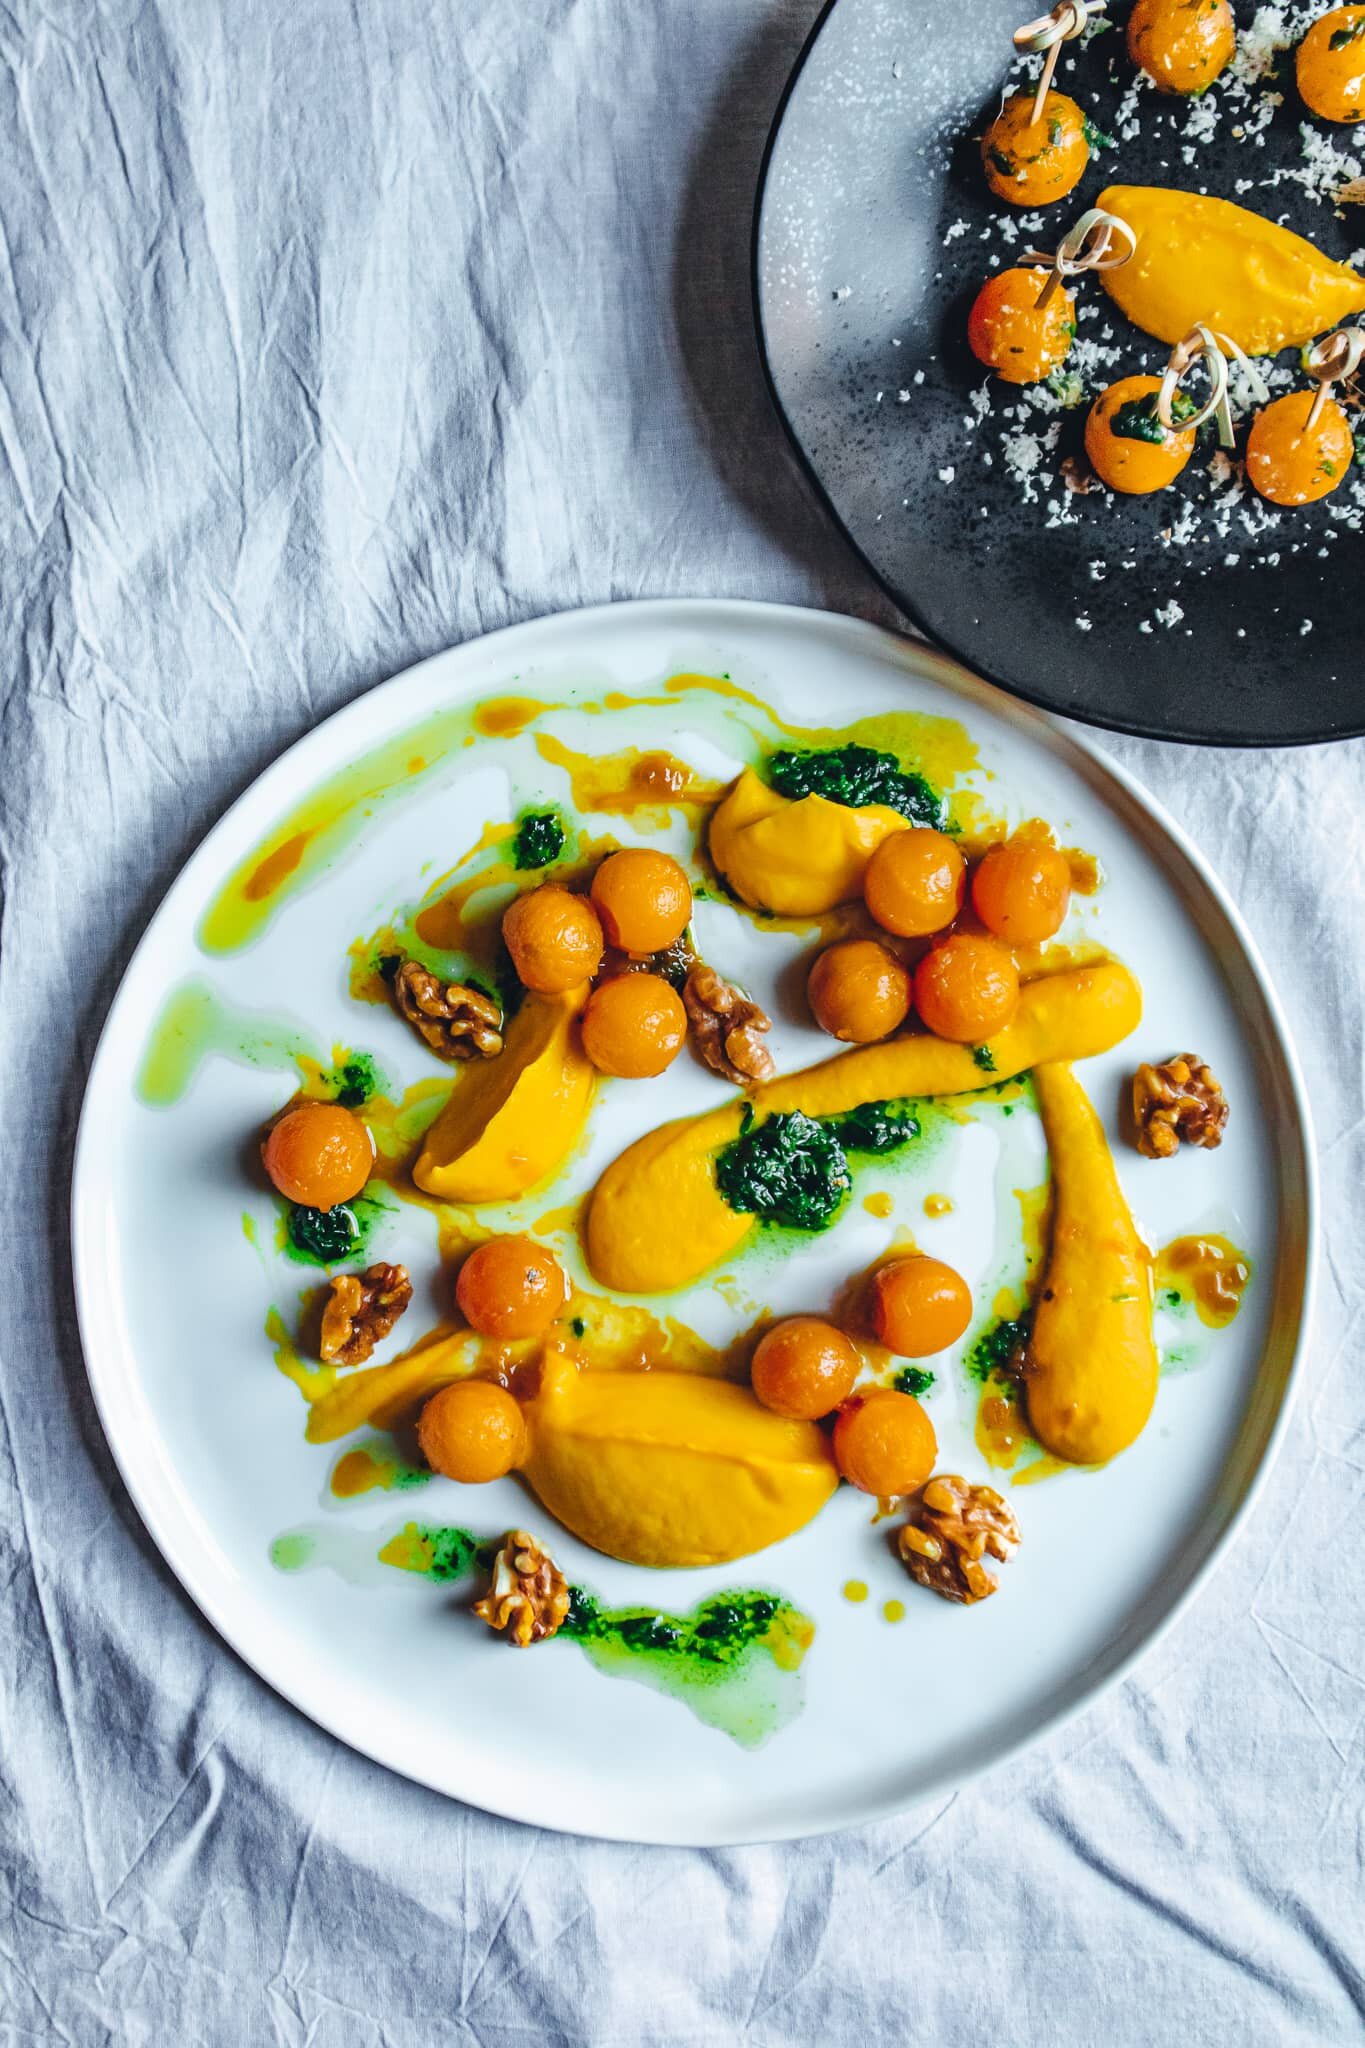 Glazed Golden Beets with Beet Purée and Parsley Pesto